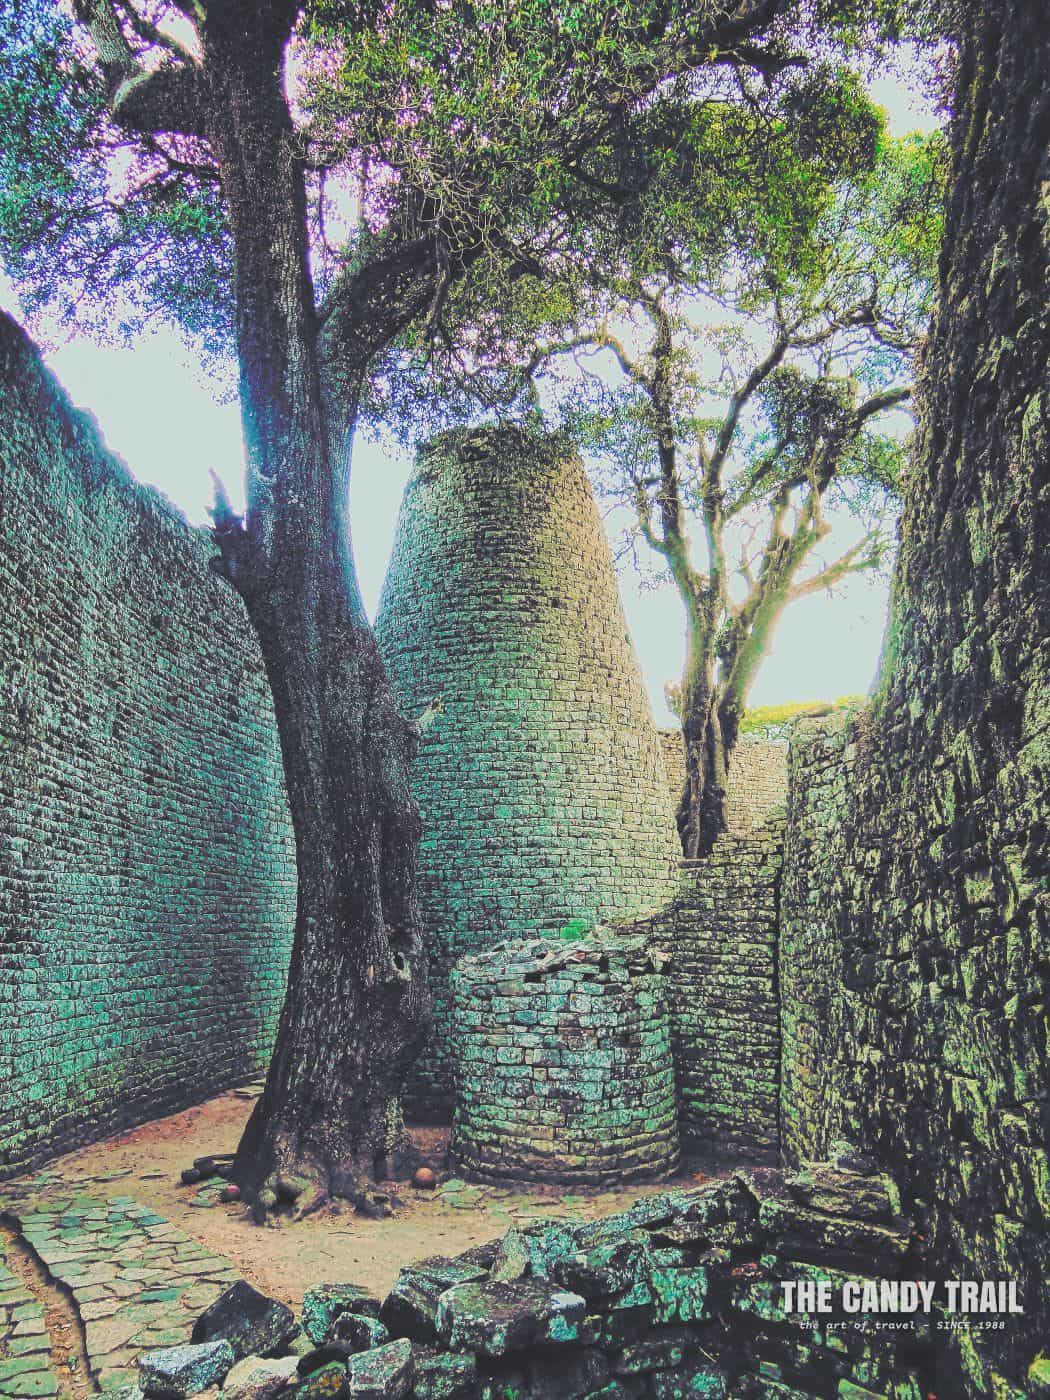 Stone Conical Tower Great Zimbabwe Ruins